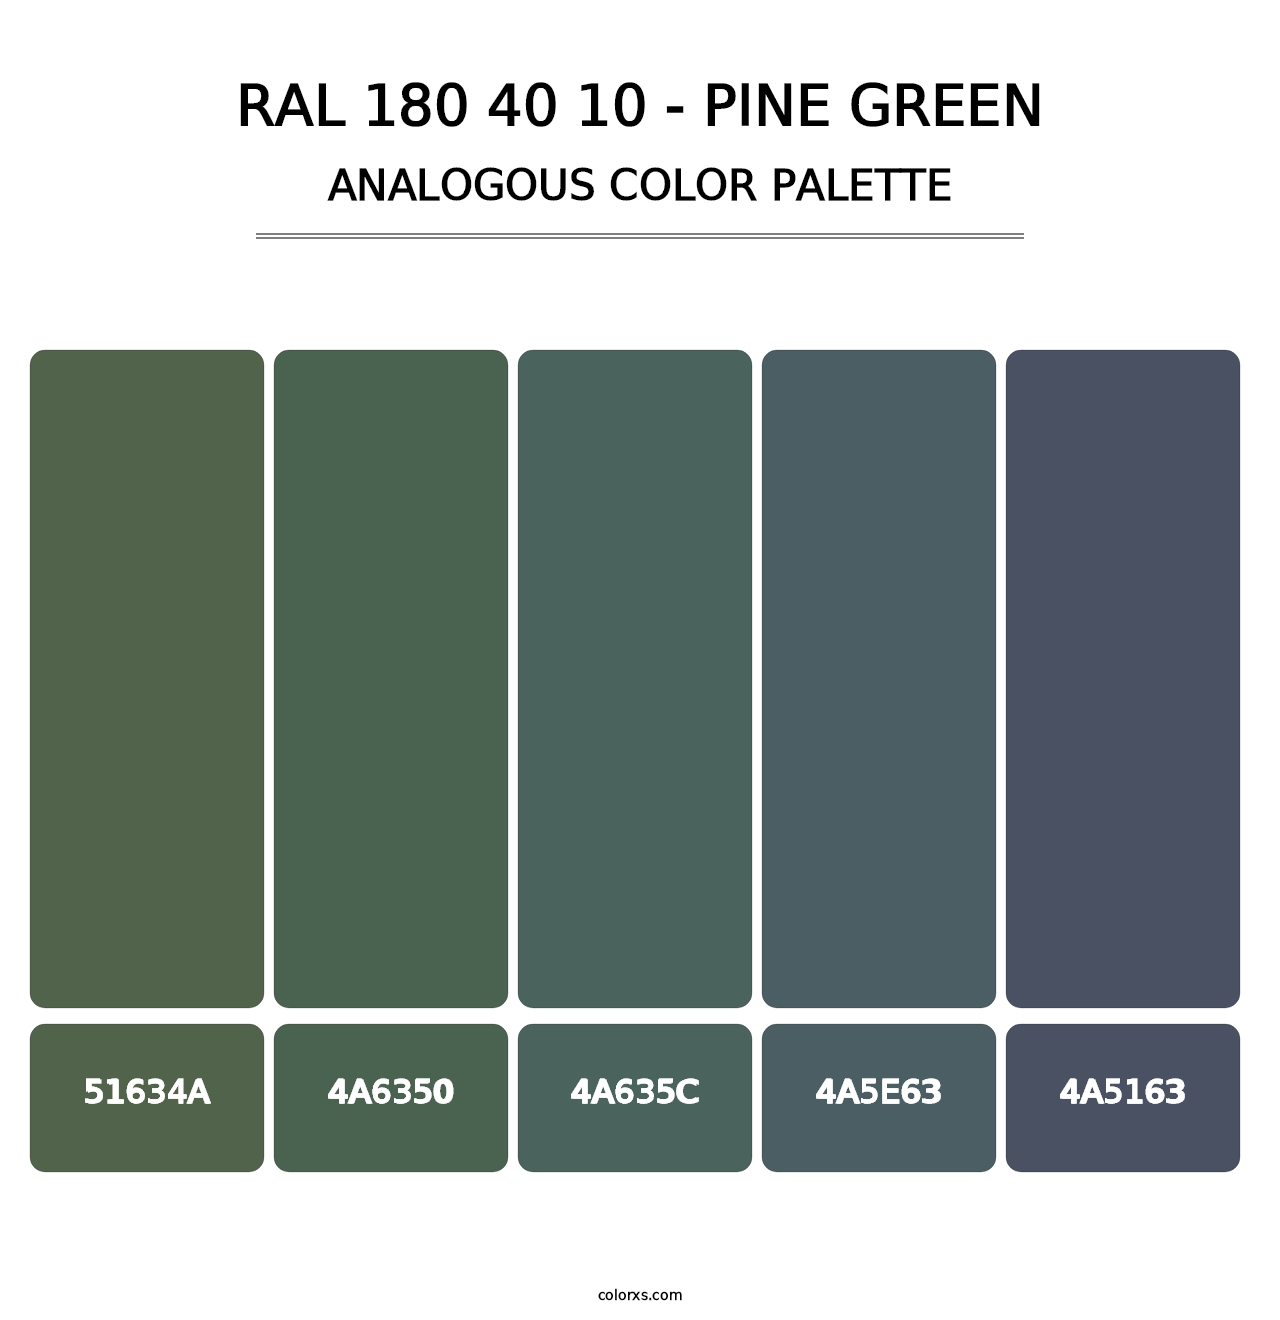 RAL 180 40 10 - Pine Green - Analogous Color Palette